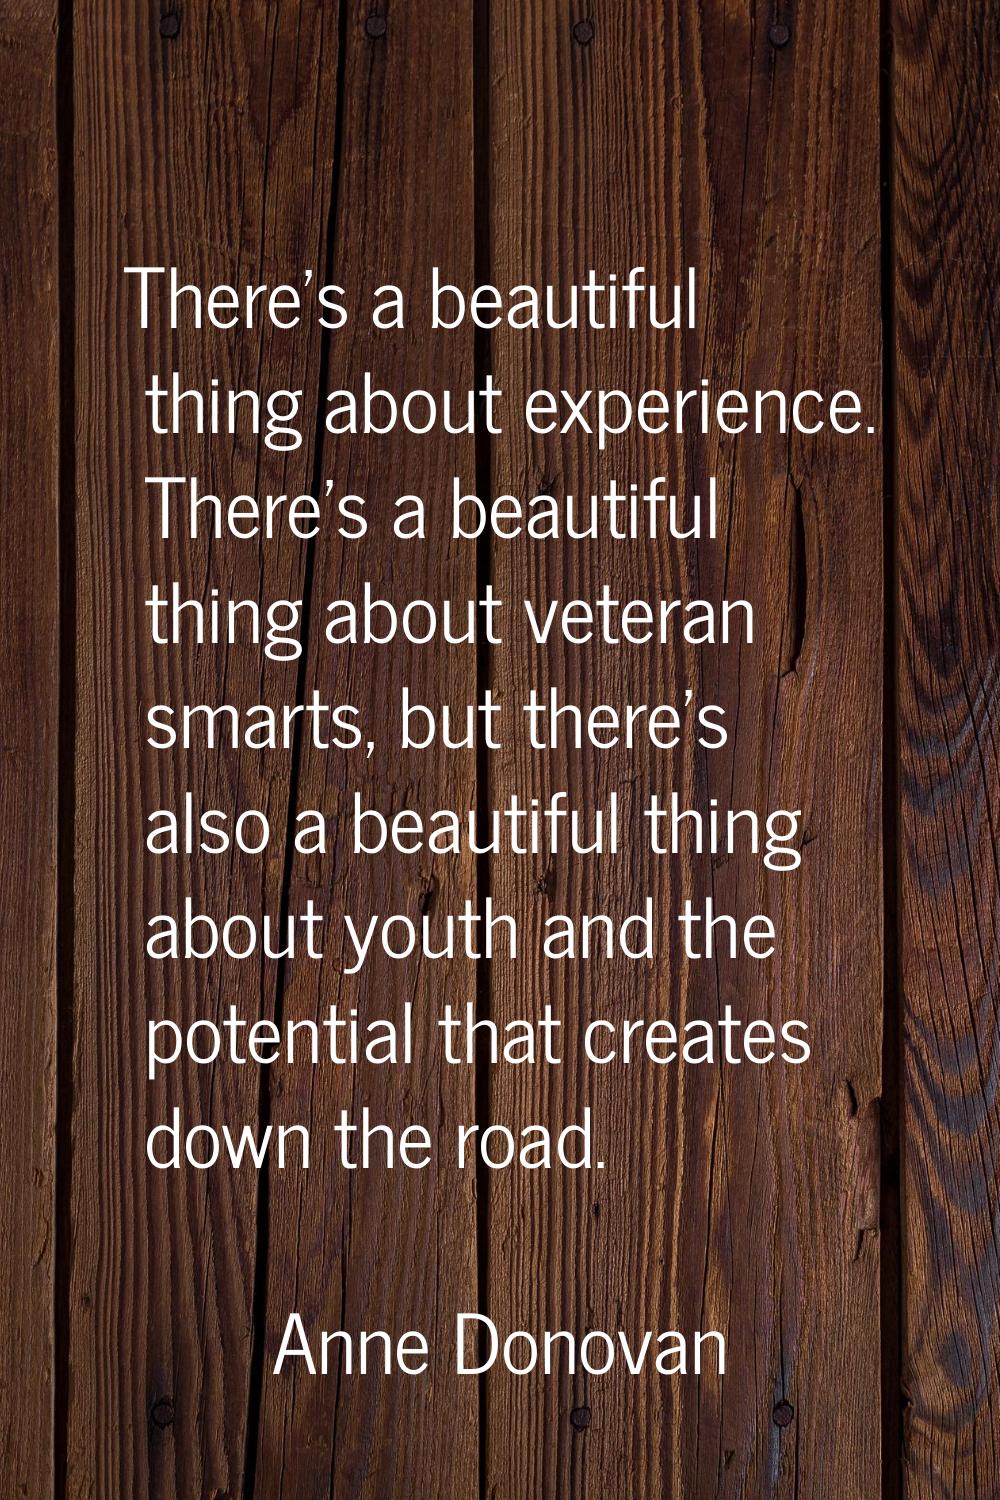 There's a beautiful thing about experience. There's a beautiful thing about veteran smarts, but the